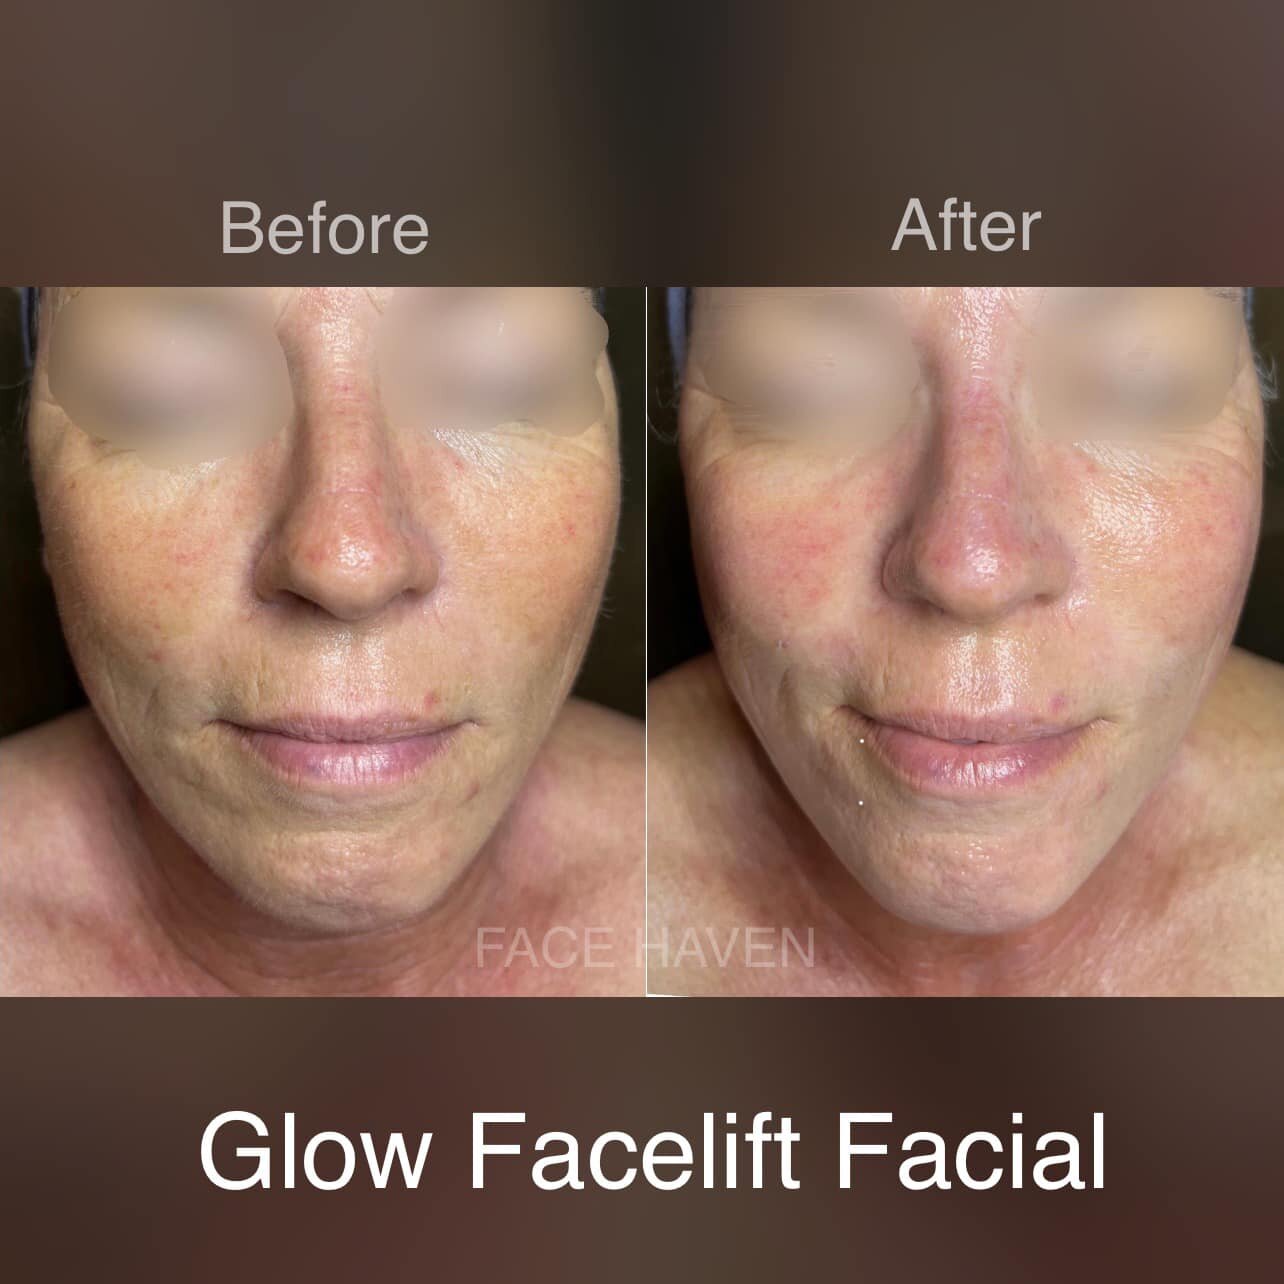 Glow Facelift Facial is our most popular treatment at Face Haven. It&rsquo;s combined with our one of a kind Facelift facial and Dermaplaning.
Our Facelift Massage loosens, trains and stimulates the facial muscles. It boosts collagen production, prom